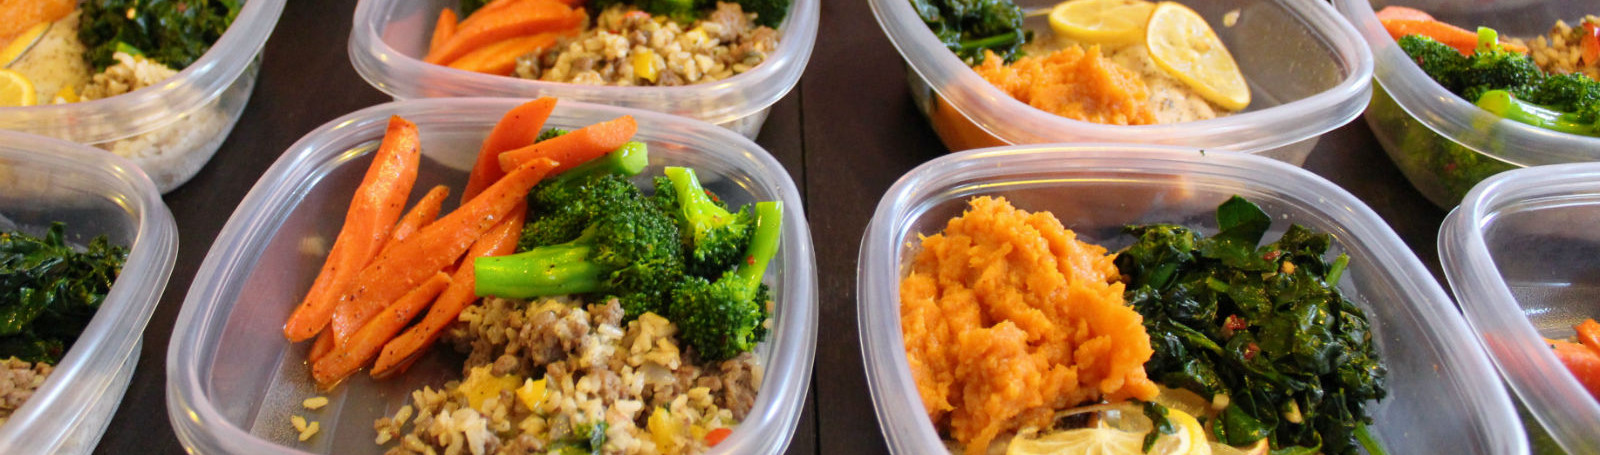 Meal Prep: An Overview